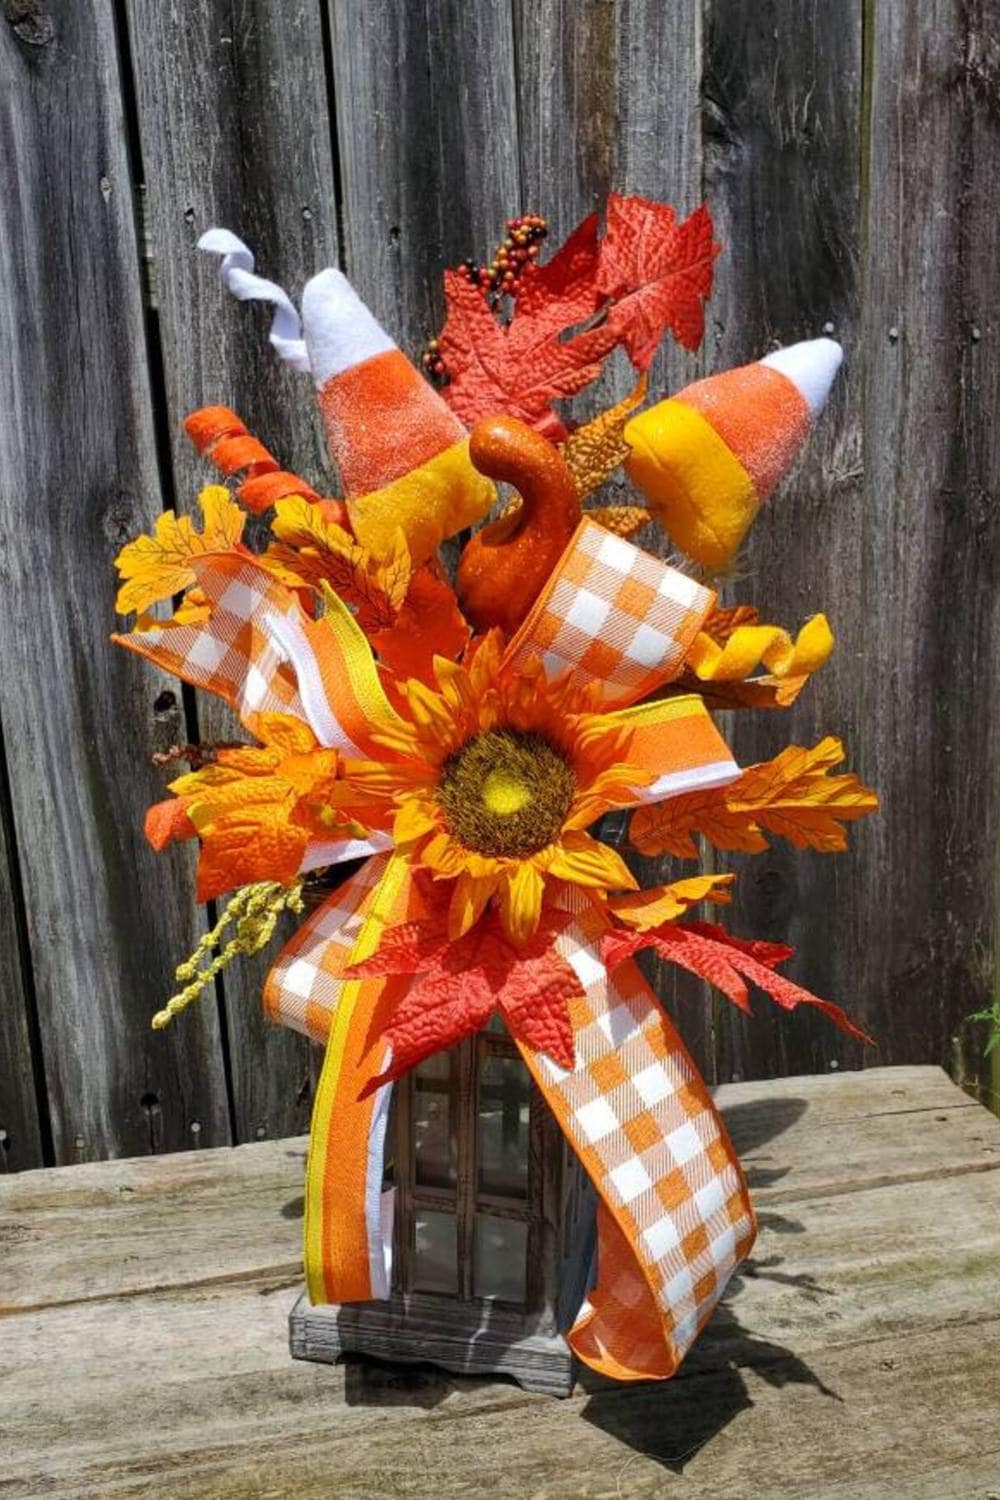 lantern with a candy corn decorations design, sunflowers and big checked bow